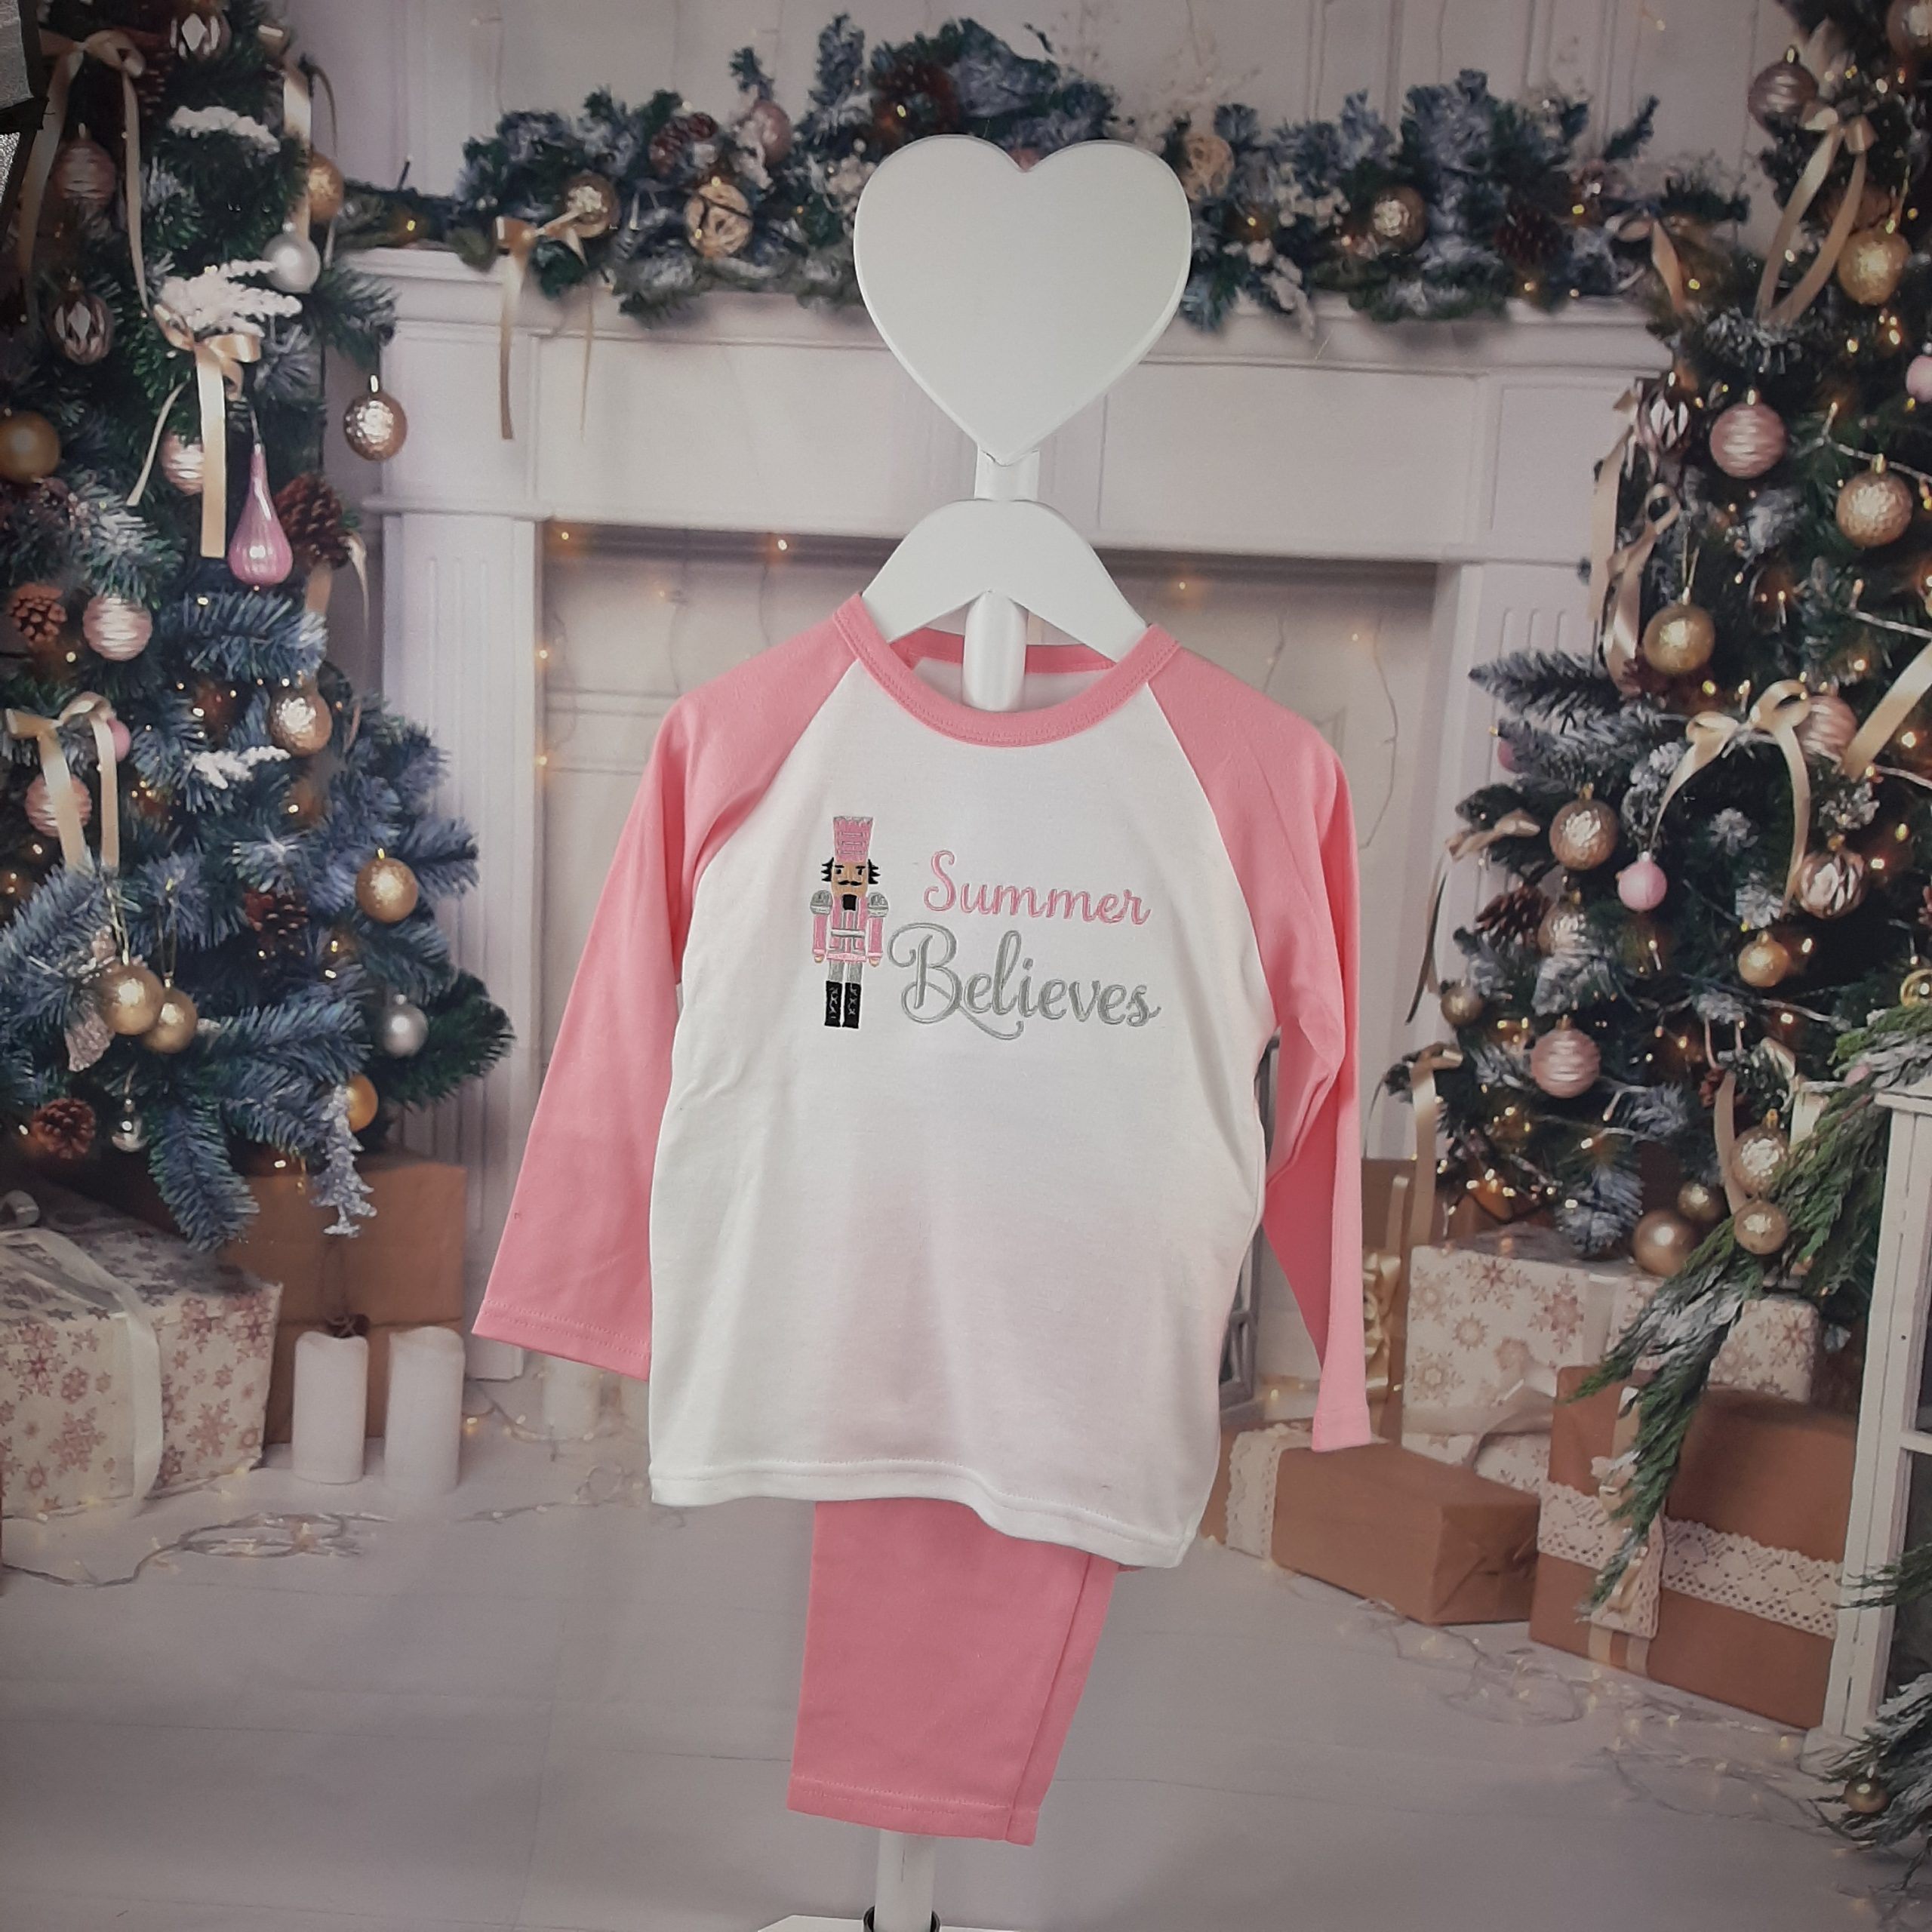 Nutcracker Christmas PJs in pink and white for children with embroidered personalisation. Believes design